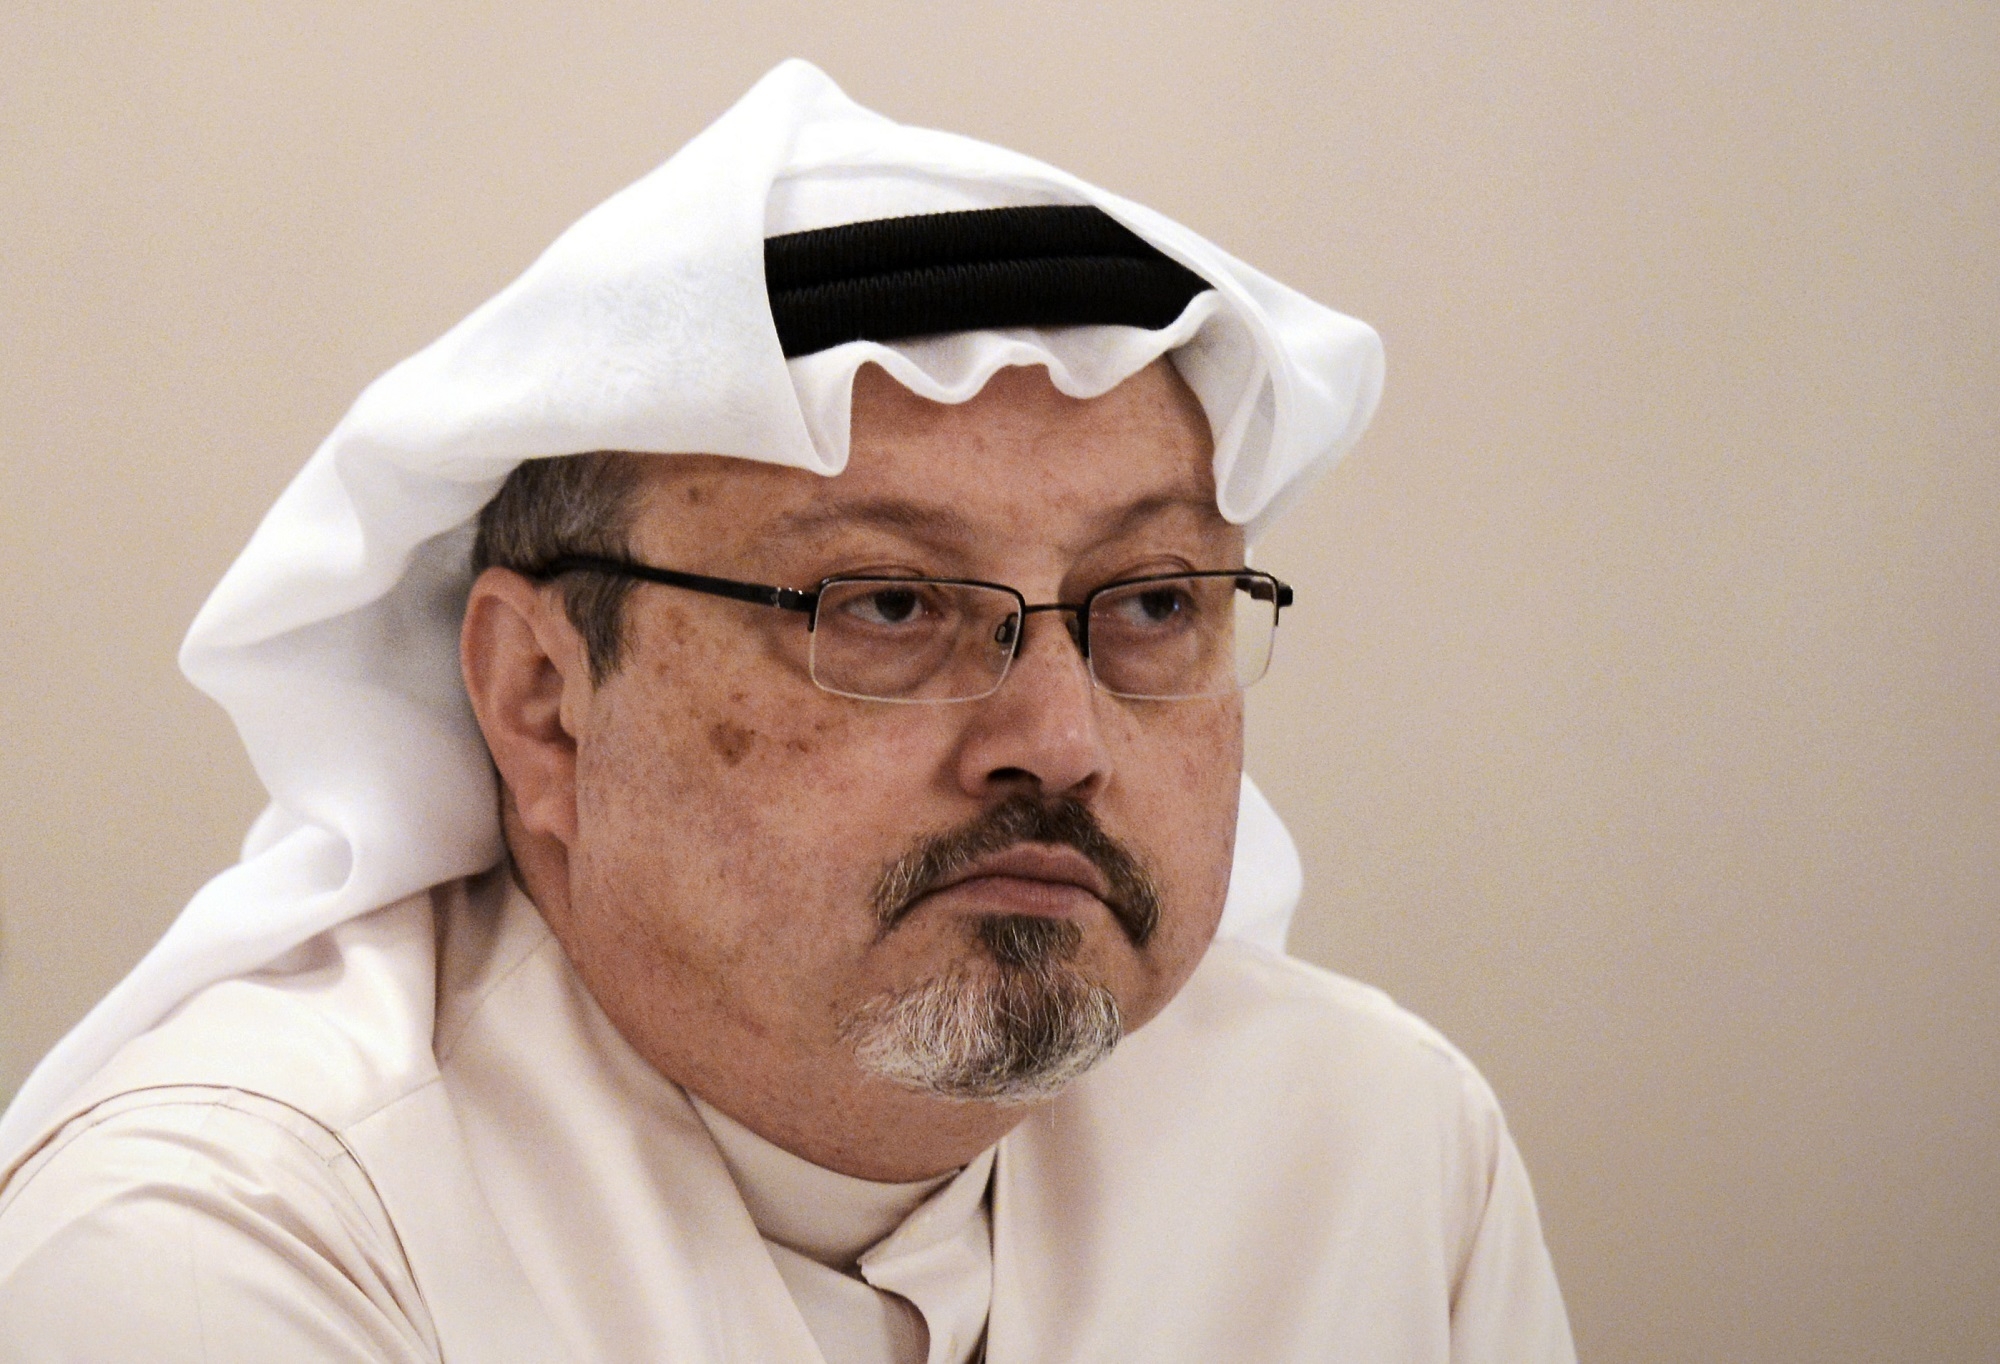 Jamal Khashoggi was murdered by Saudi government agents at the kingdom's consulate in Istanbul in October 2018